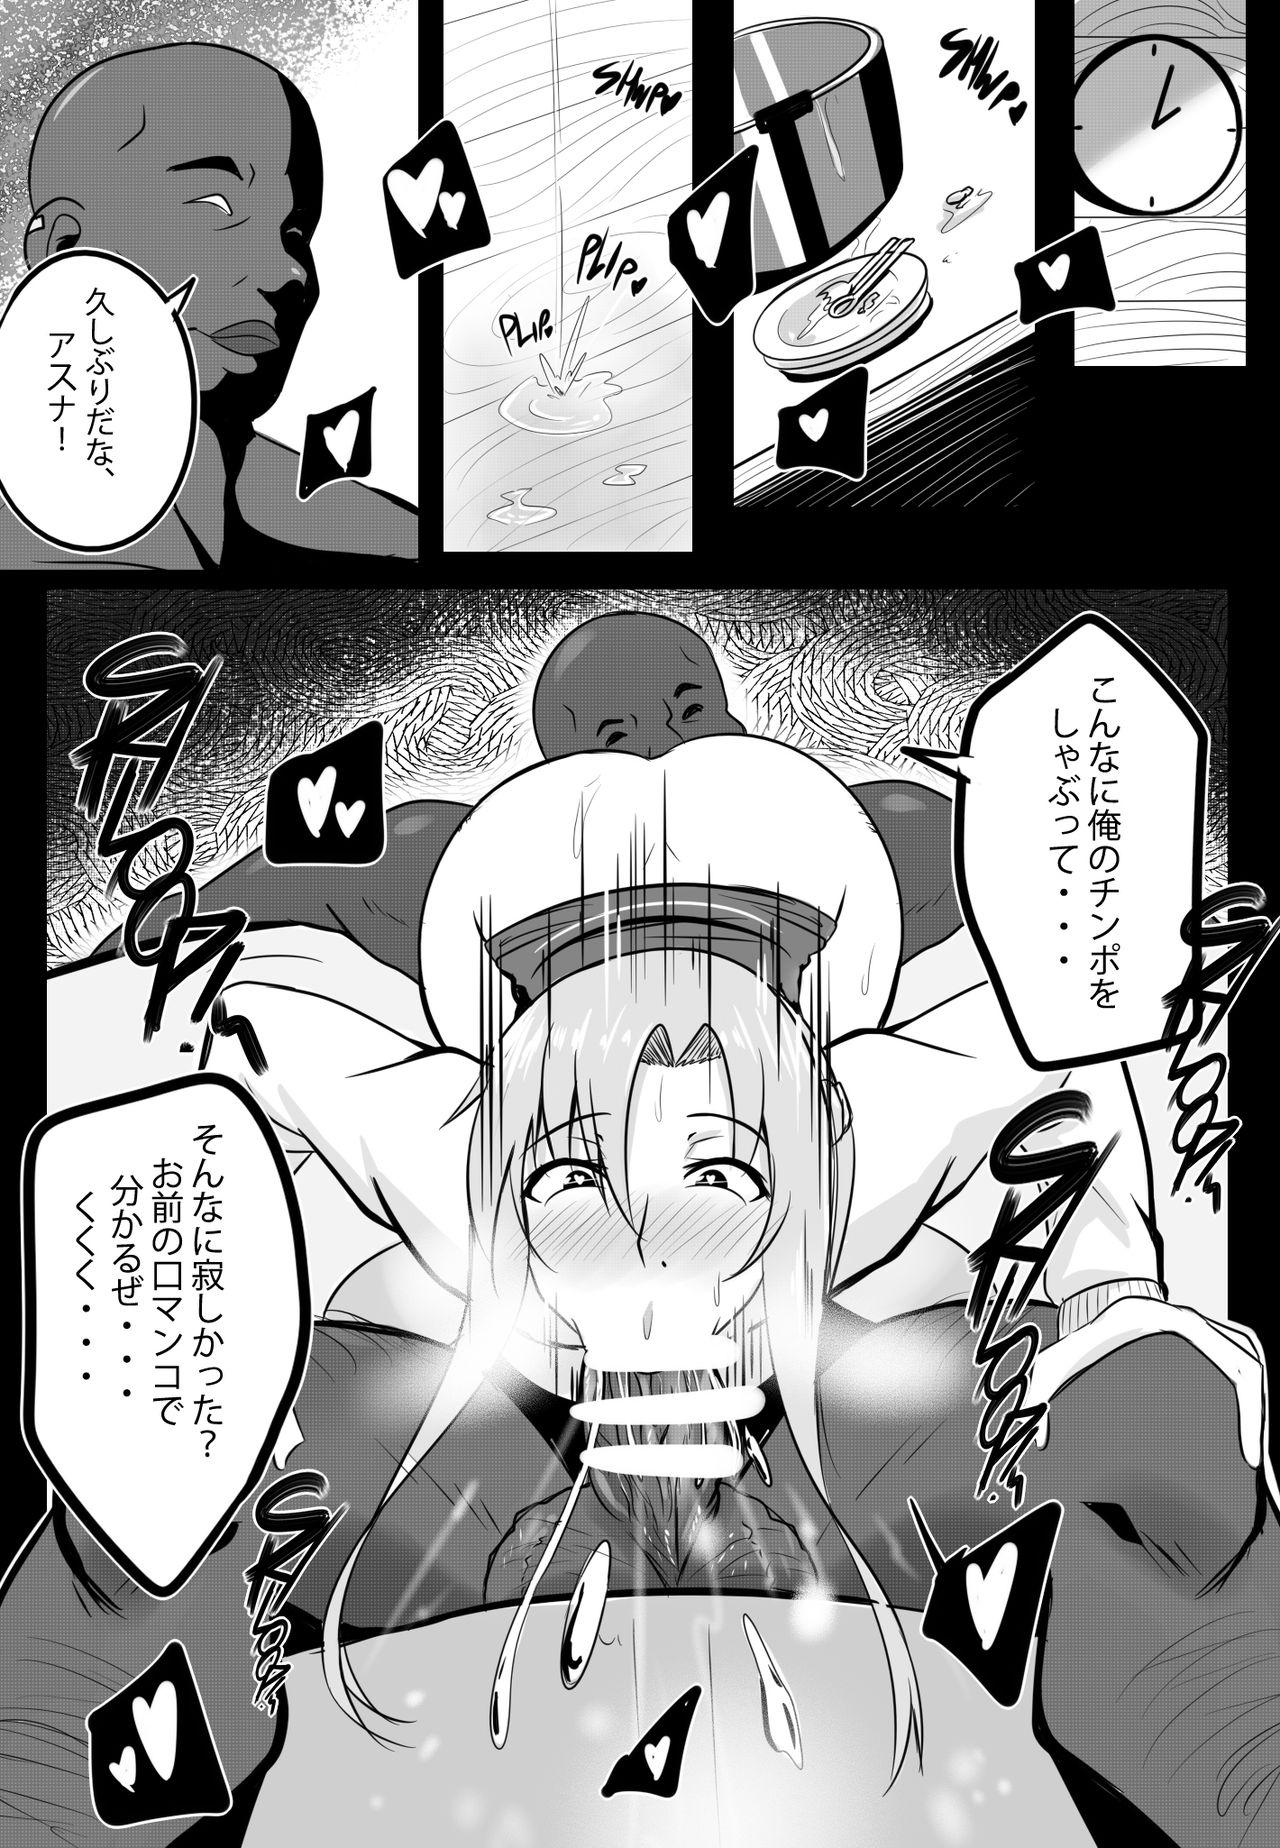 Aunt B-Trayal 19 - Sword art online Hot Girl - Page 5